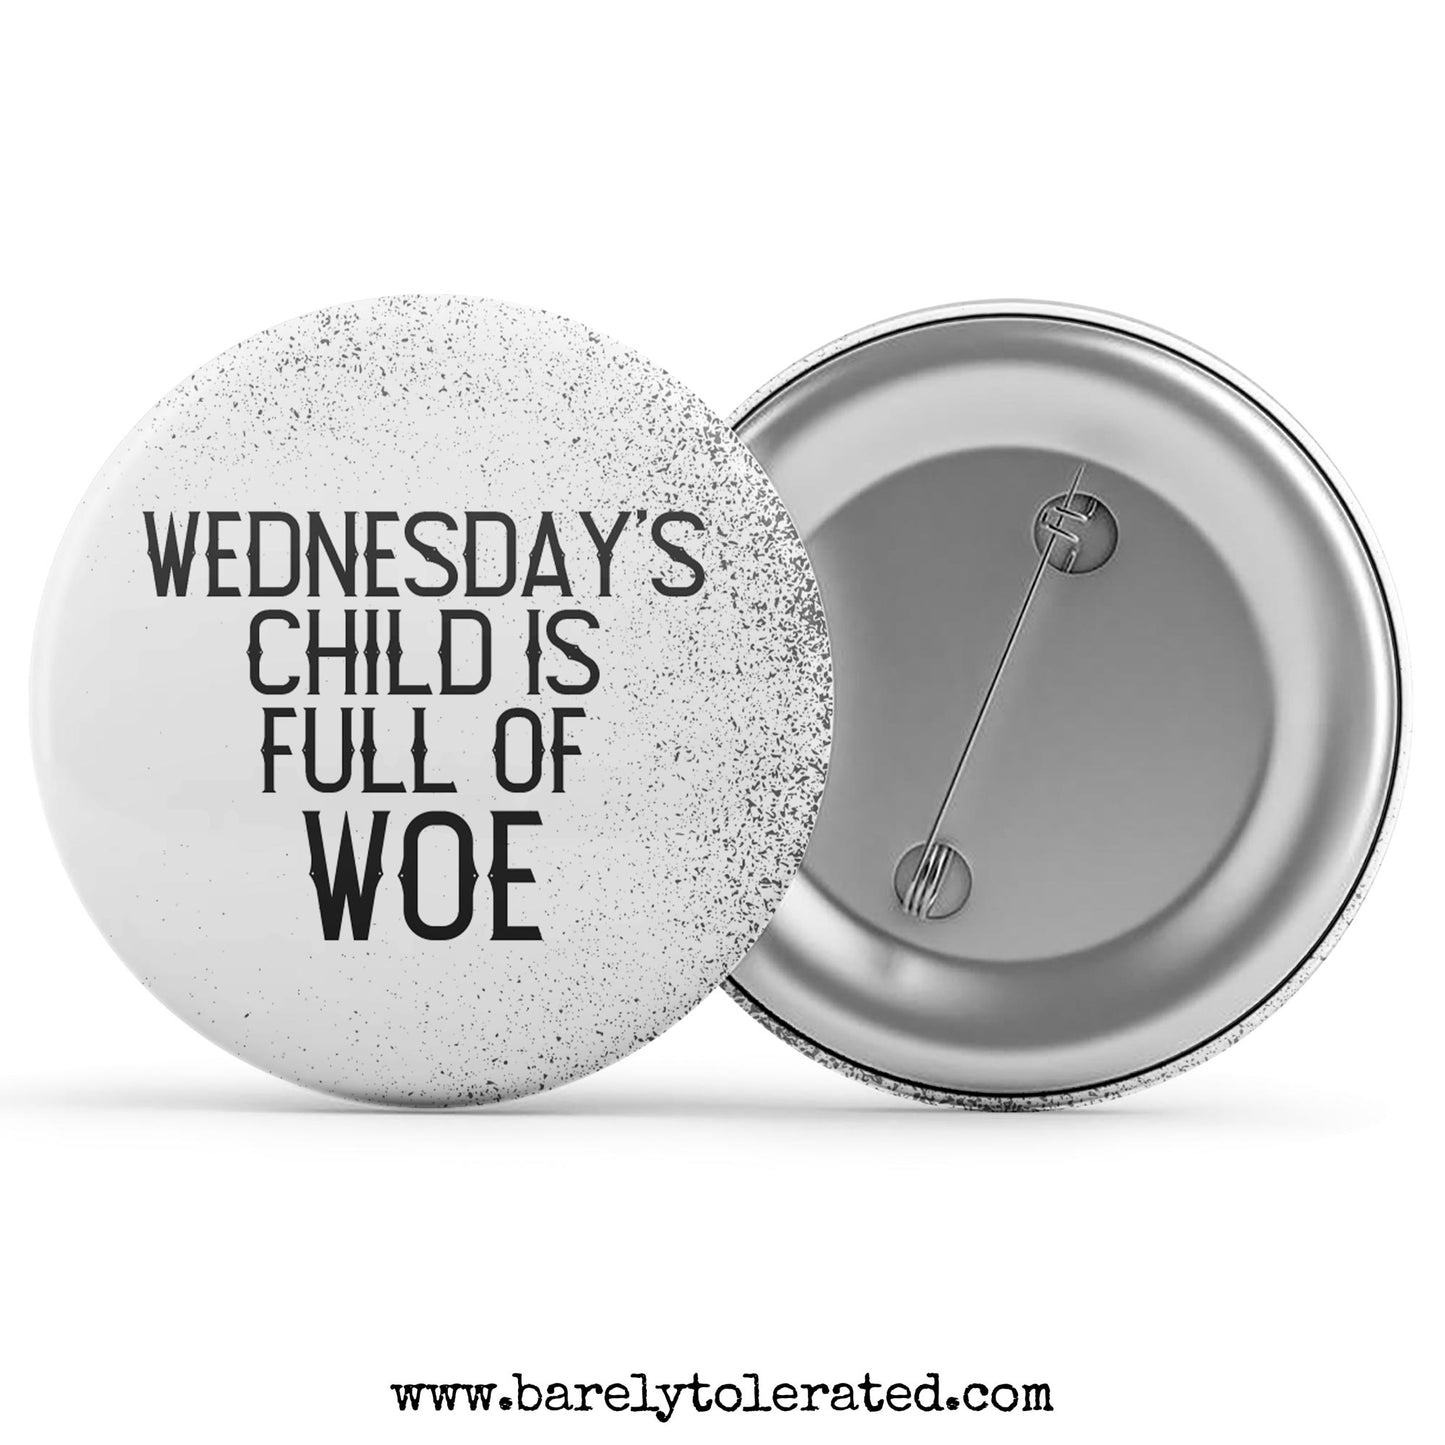 Wednesday's Child is Full of Woe